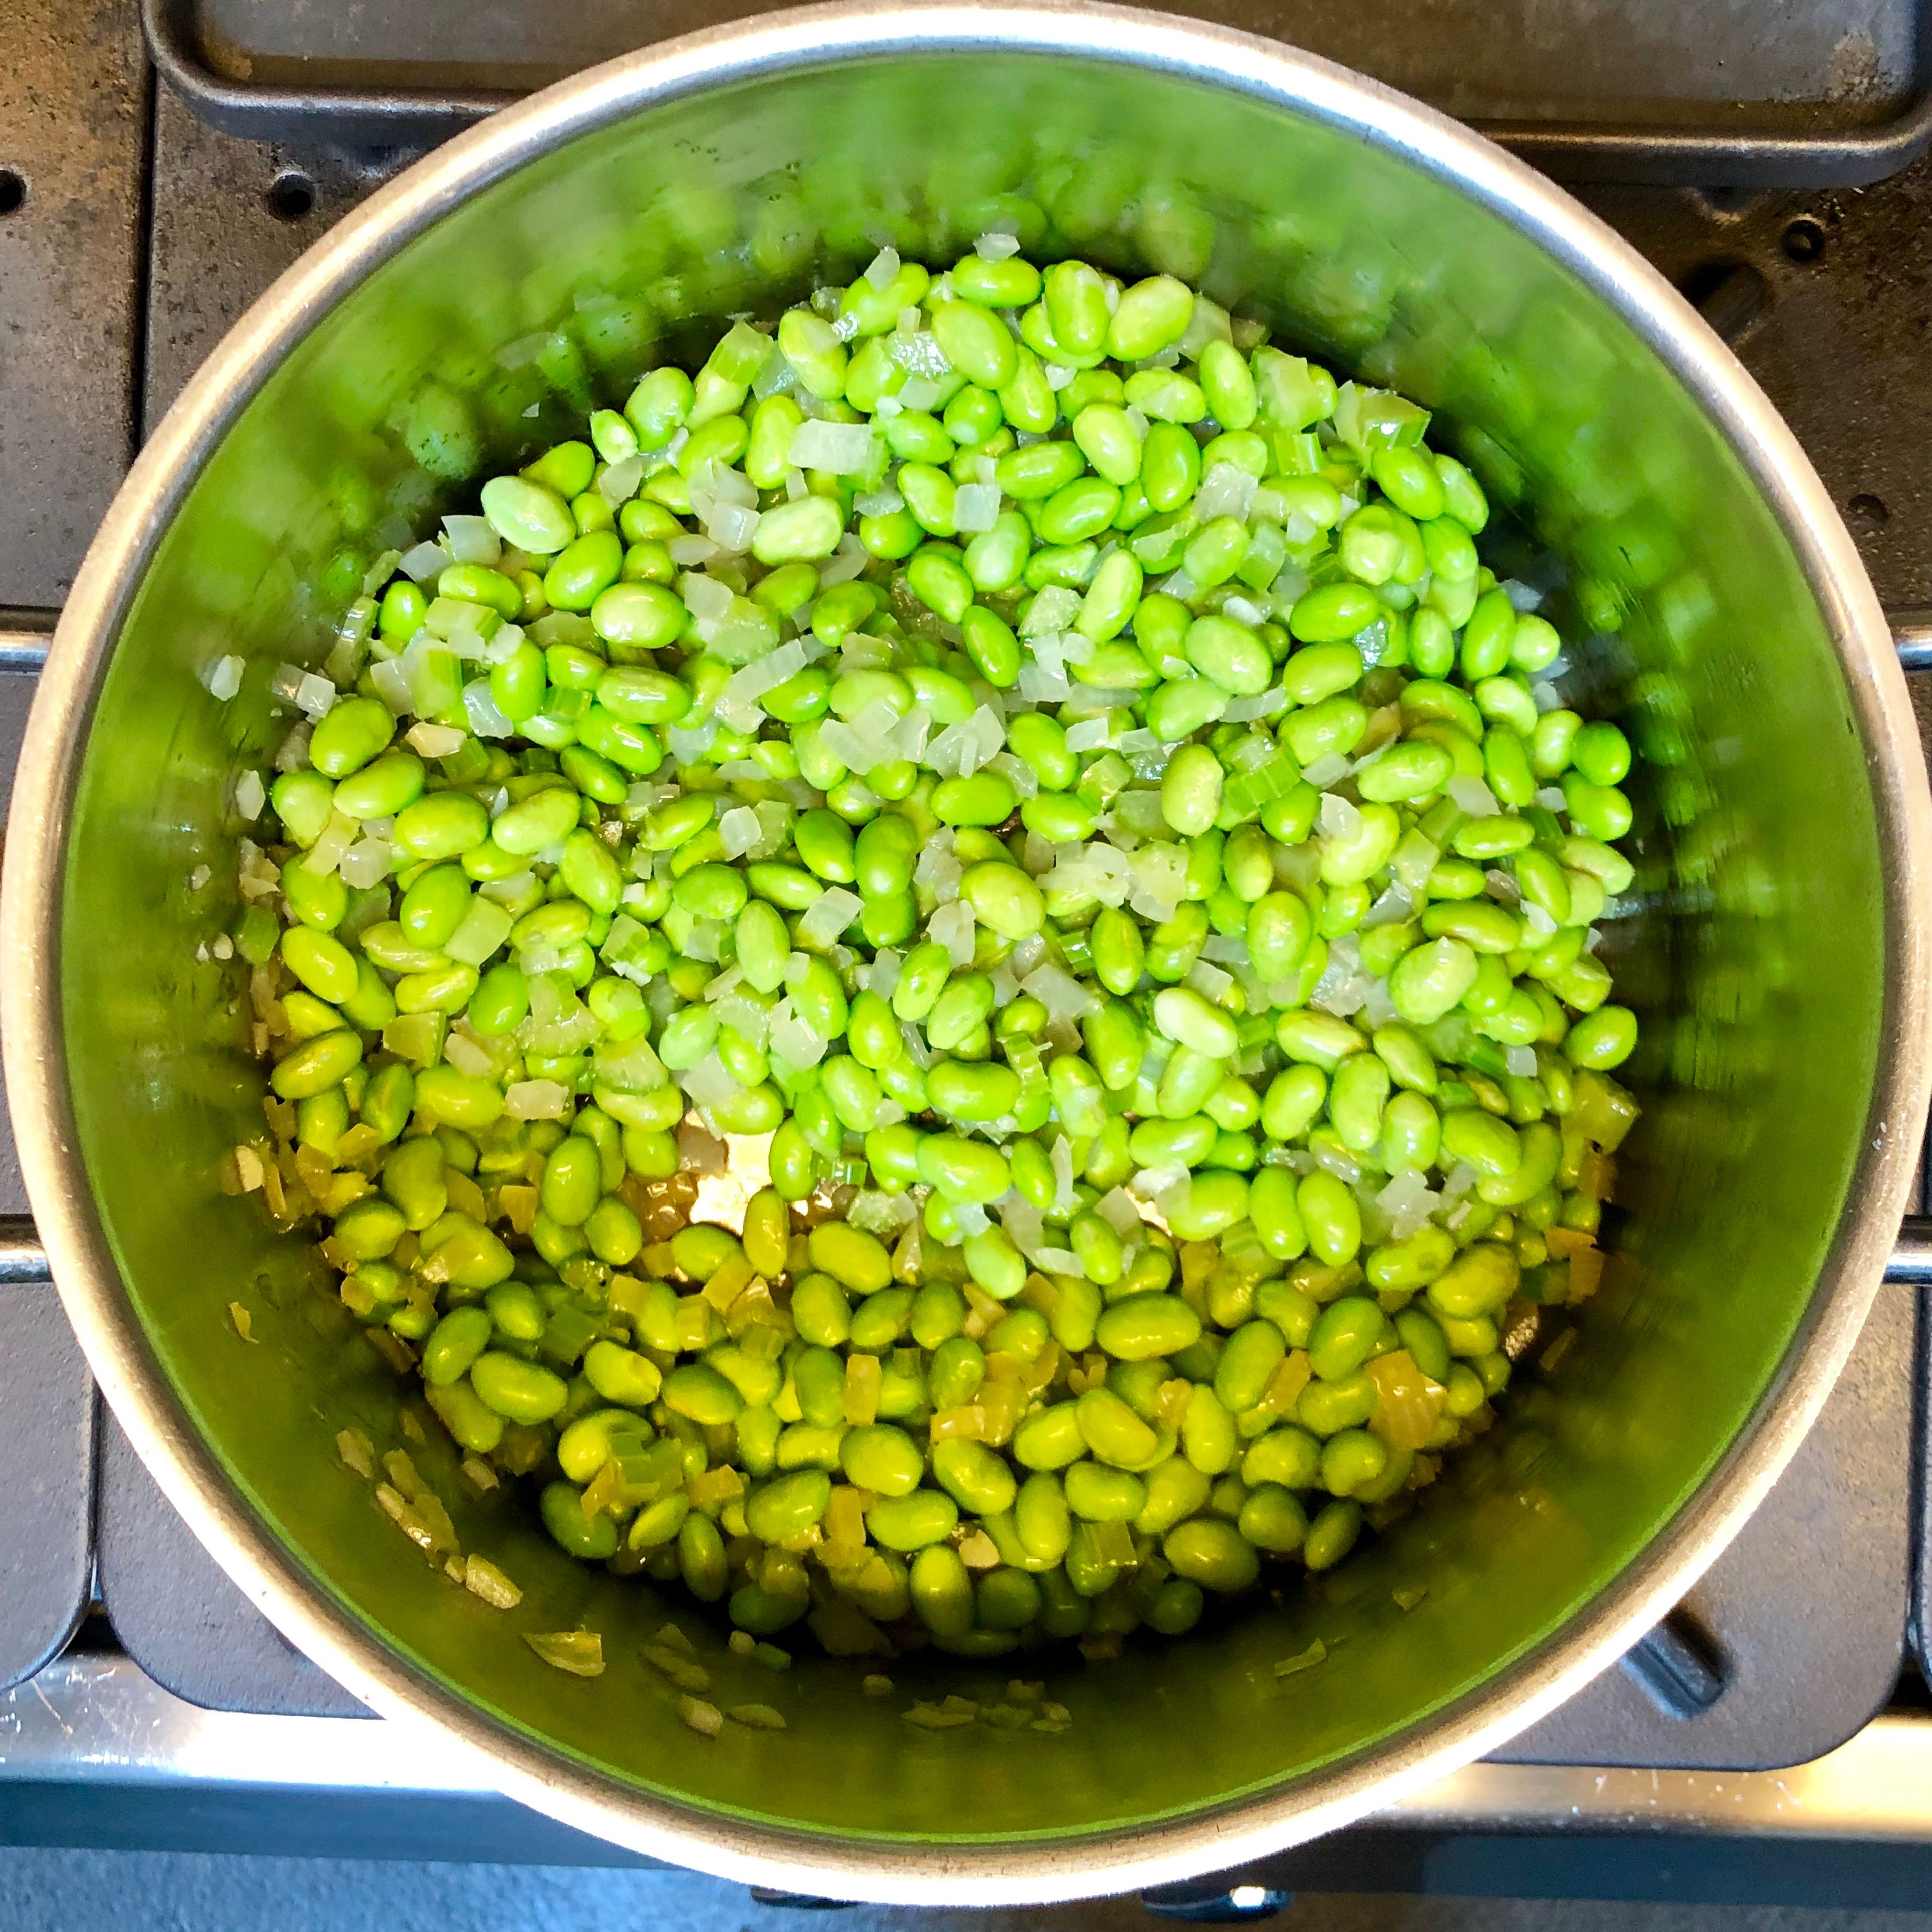 Add edamame beans. Cook for 2 more minutes.